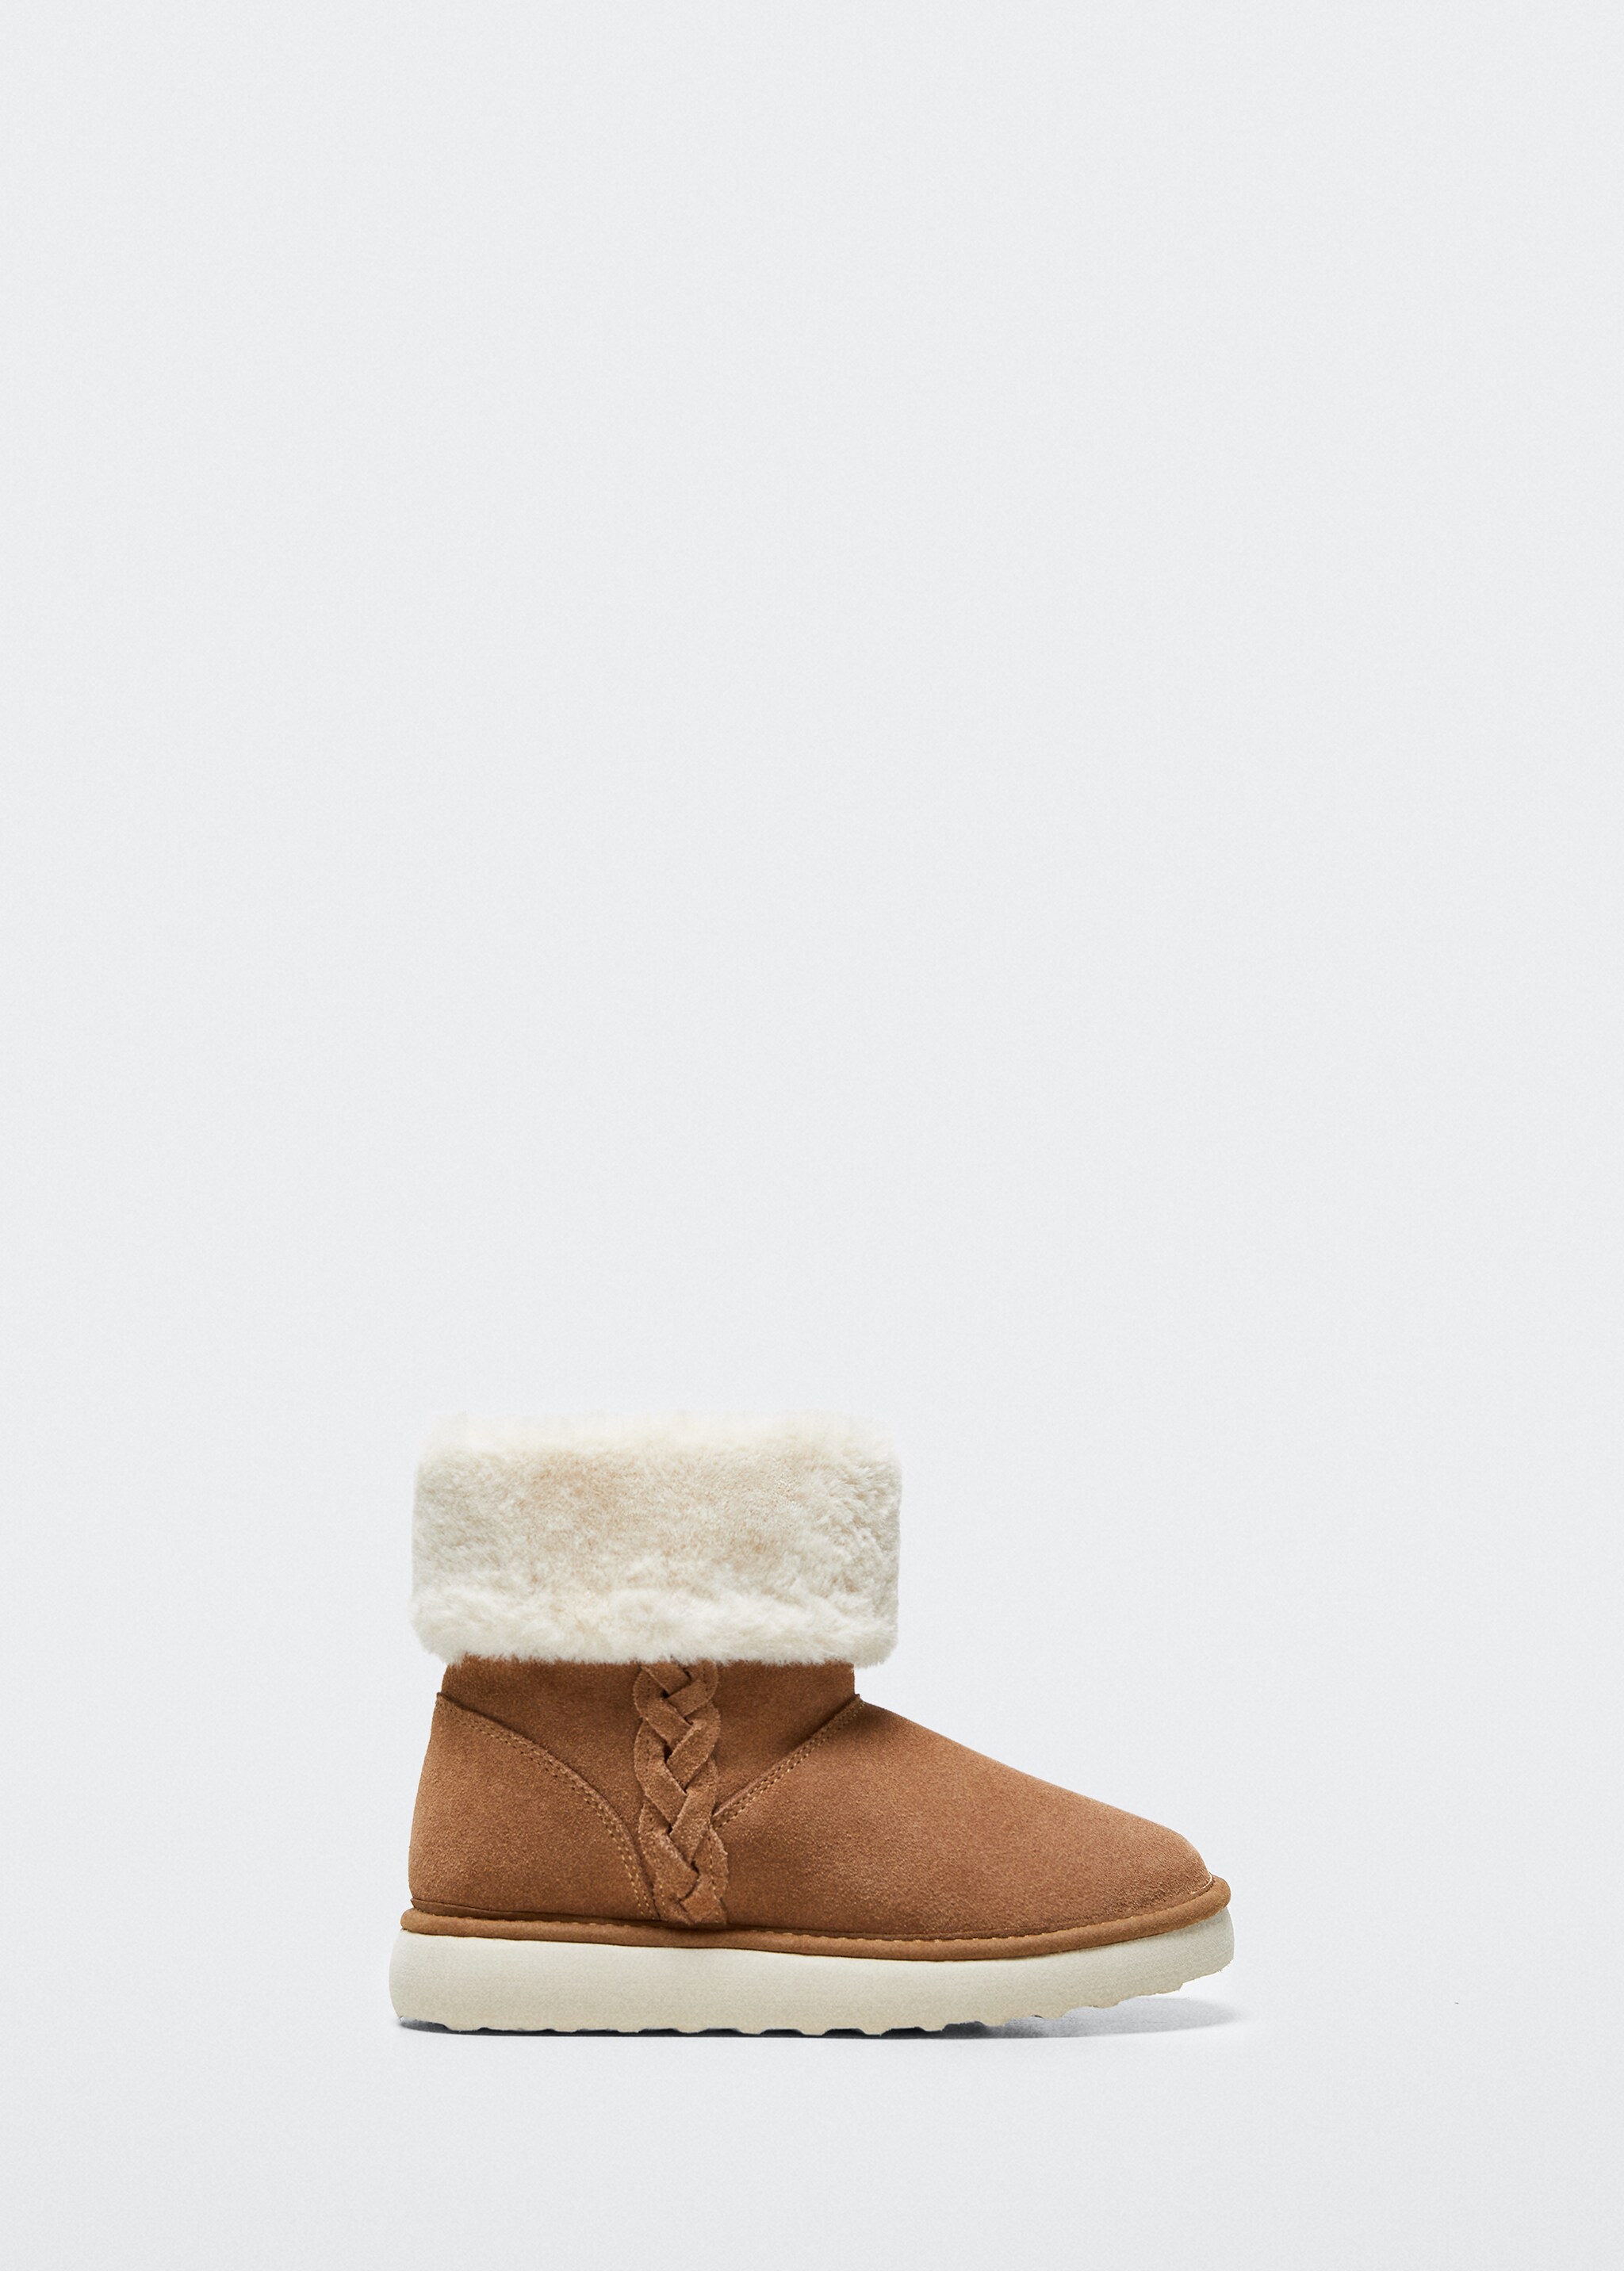 Shearling-lined ankle boots - Article without model